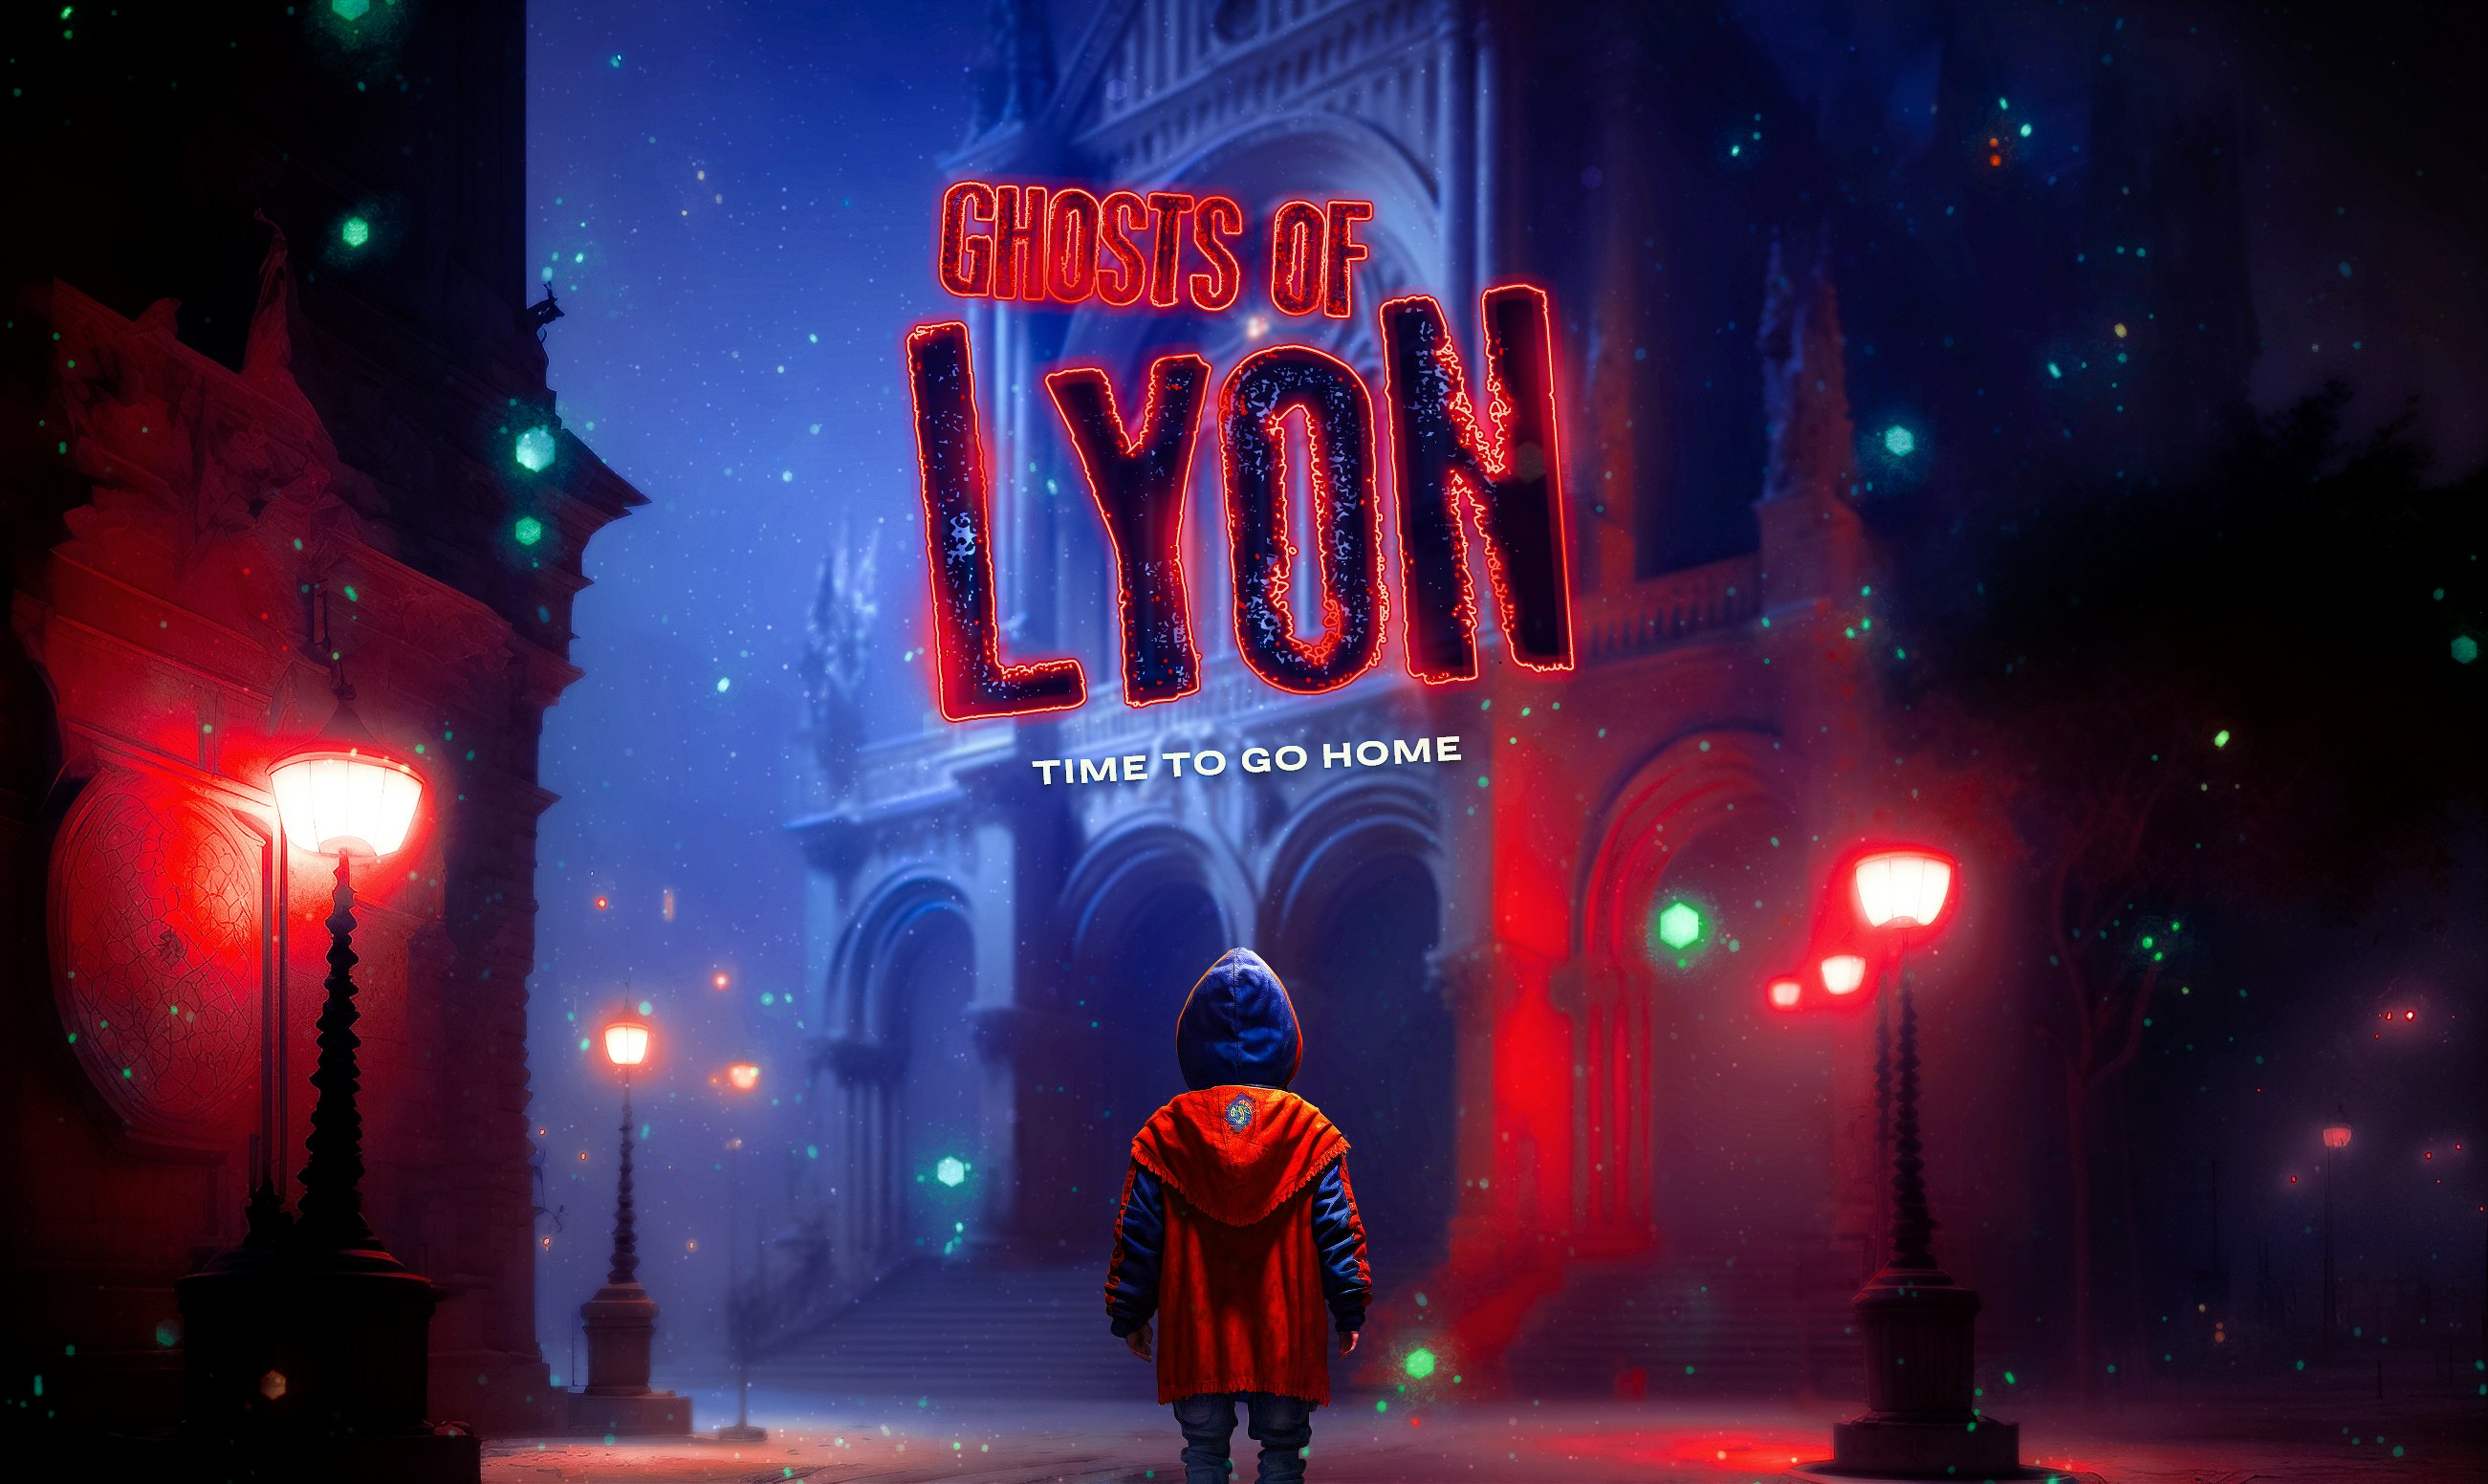 Ghosts of Lyon: Time to go home